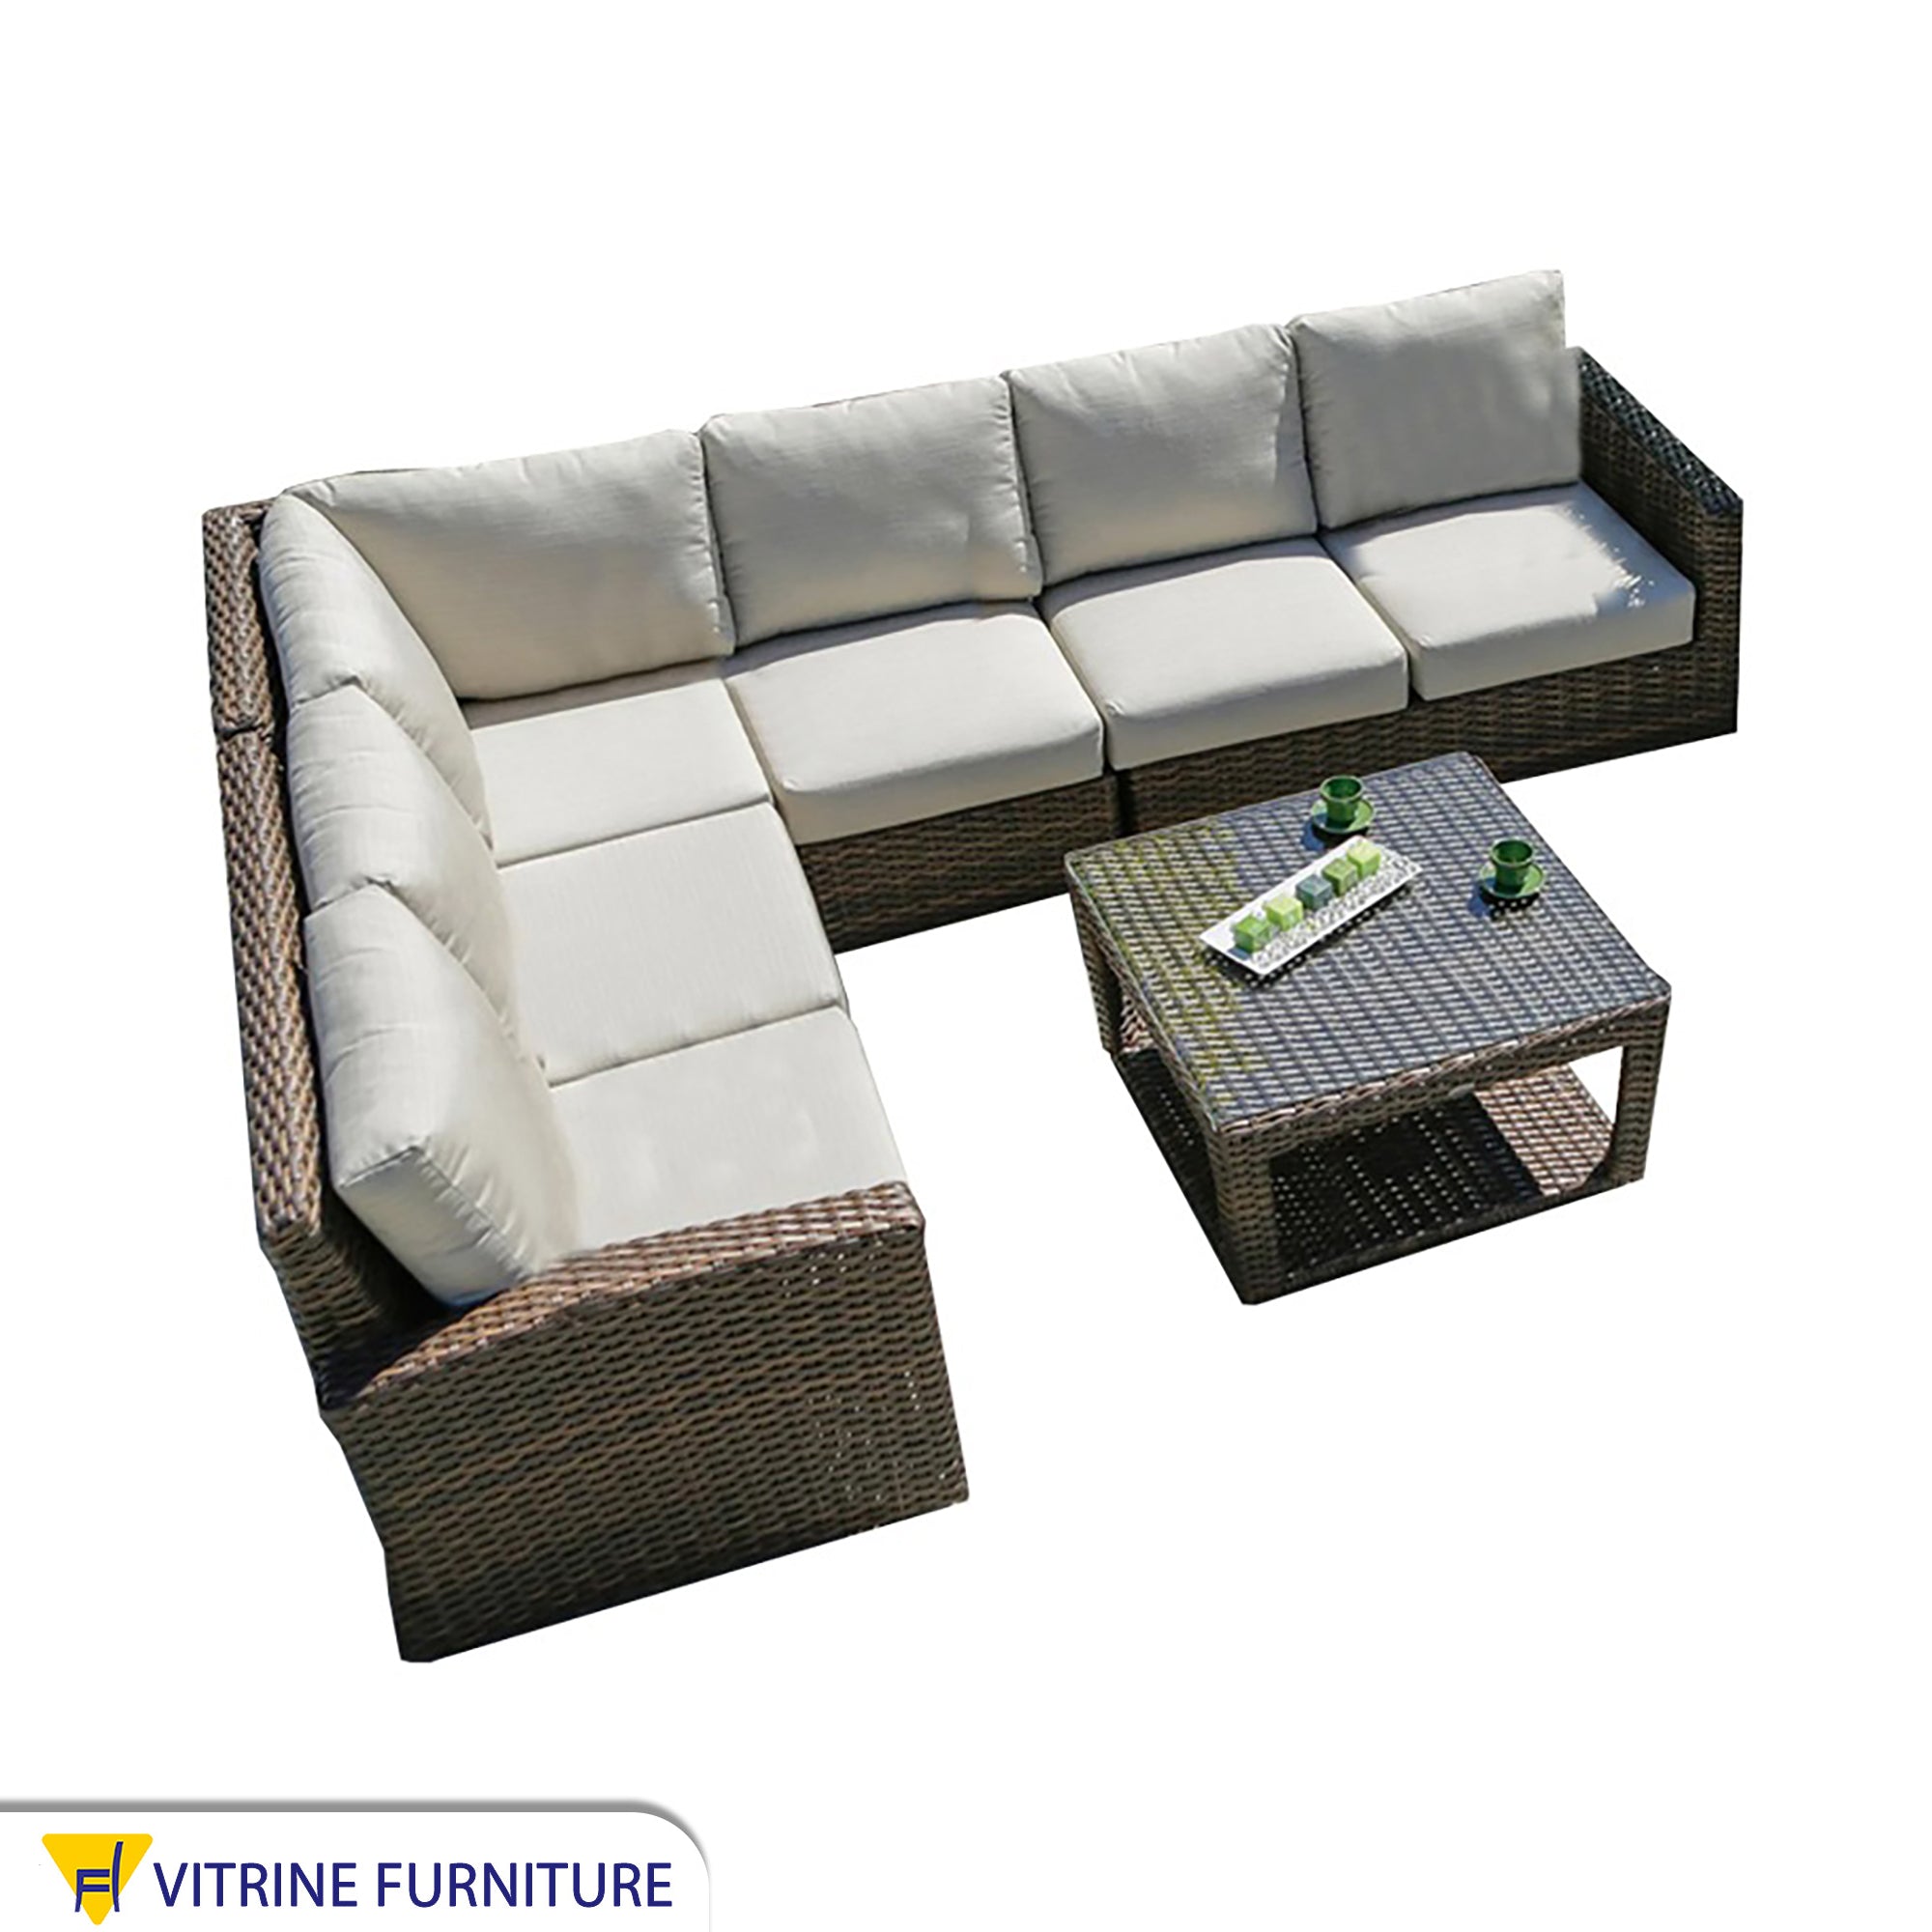 VIP outdoor corner set with two sofas and a table